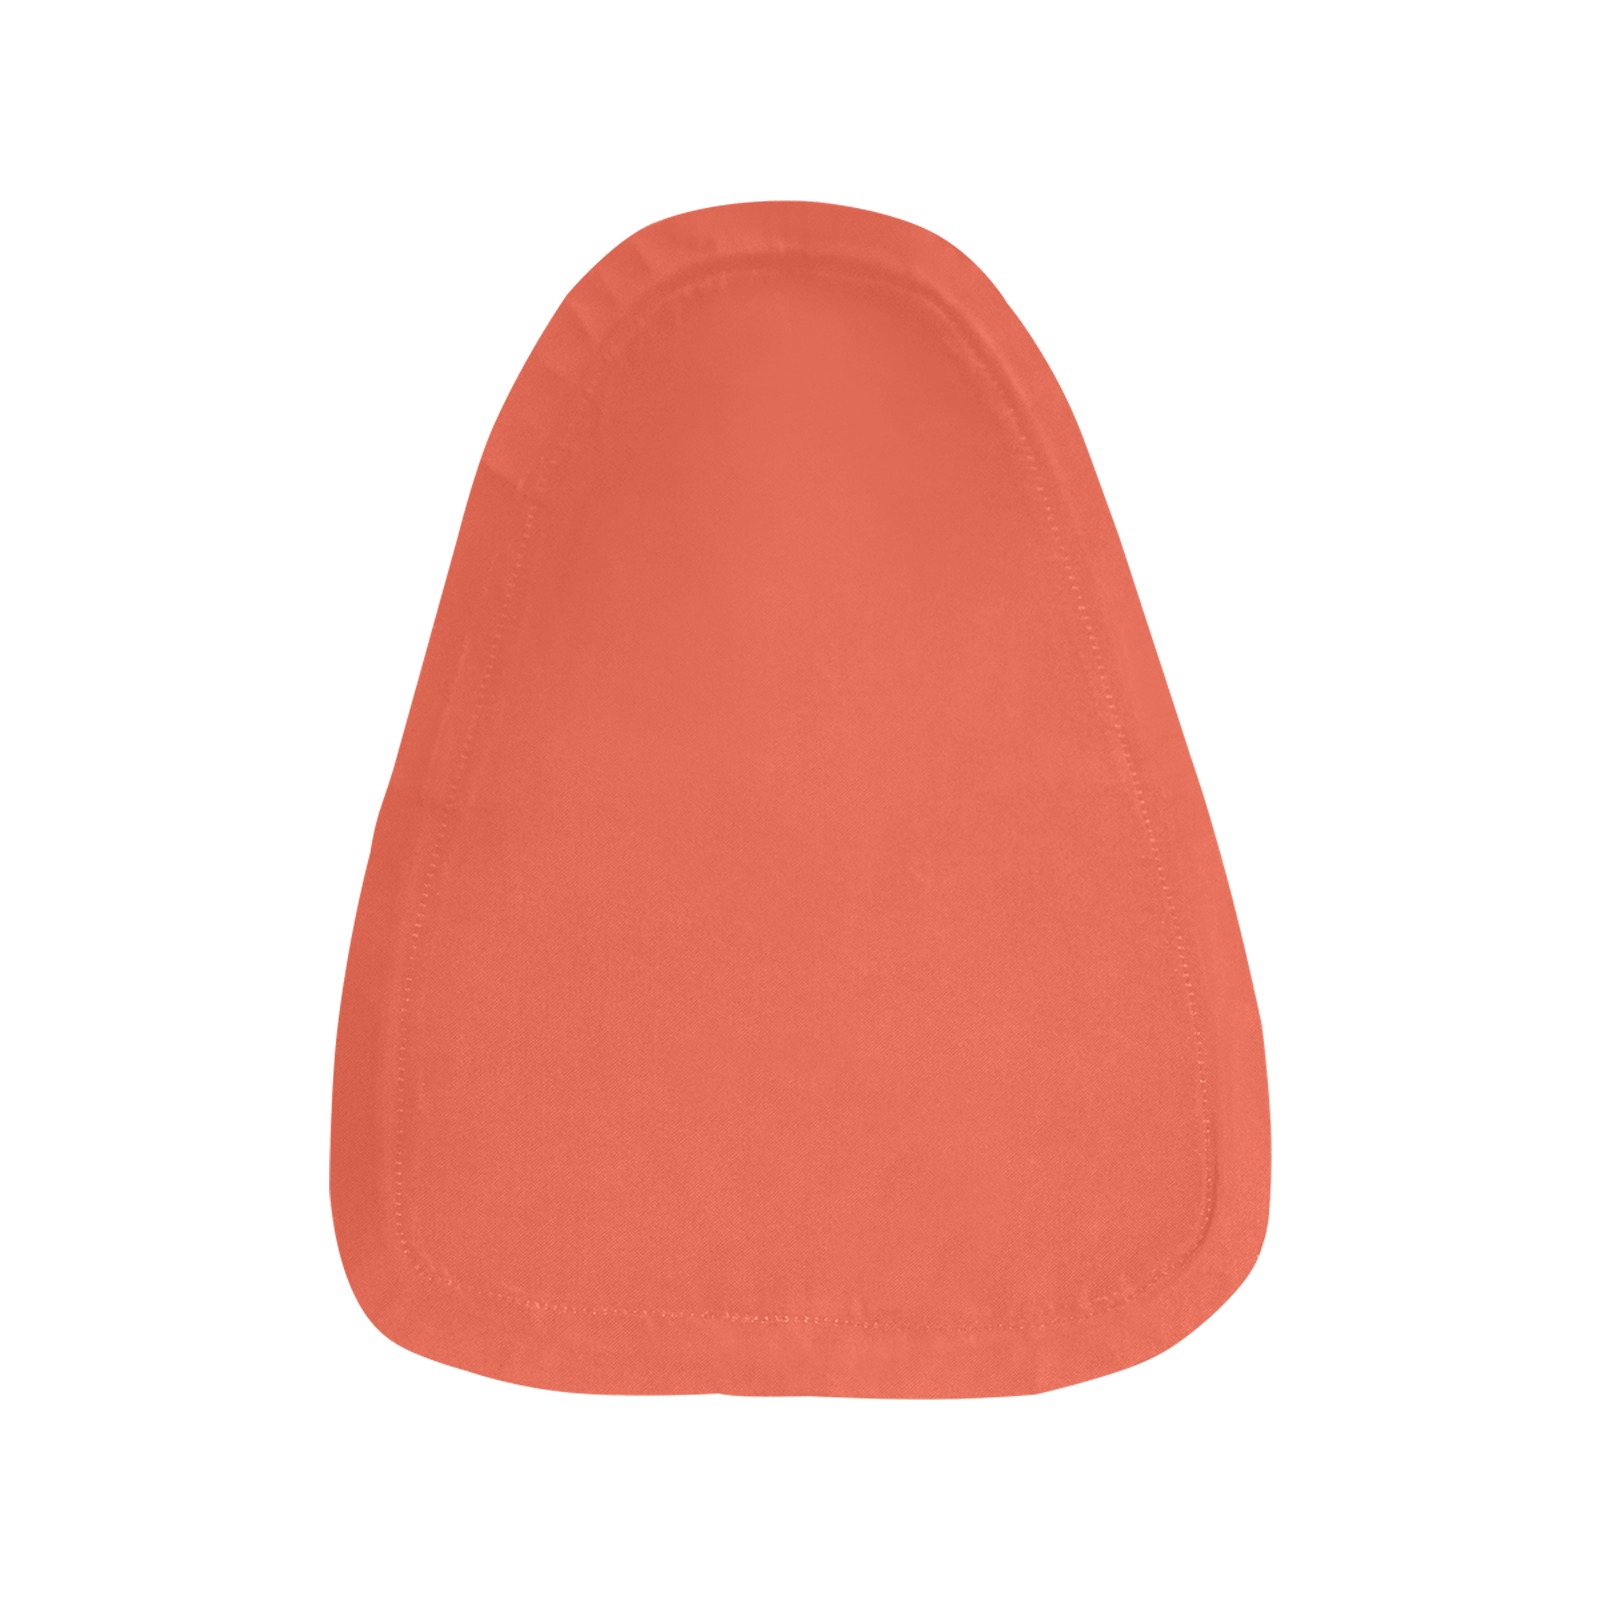 color tomato Waterproof Bicycle Seat Cover